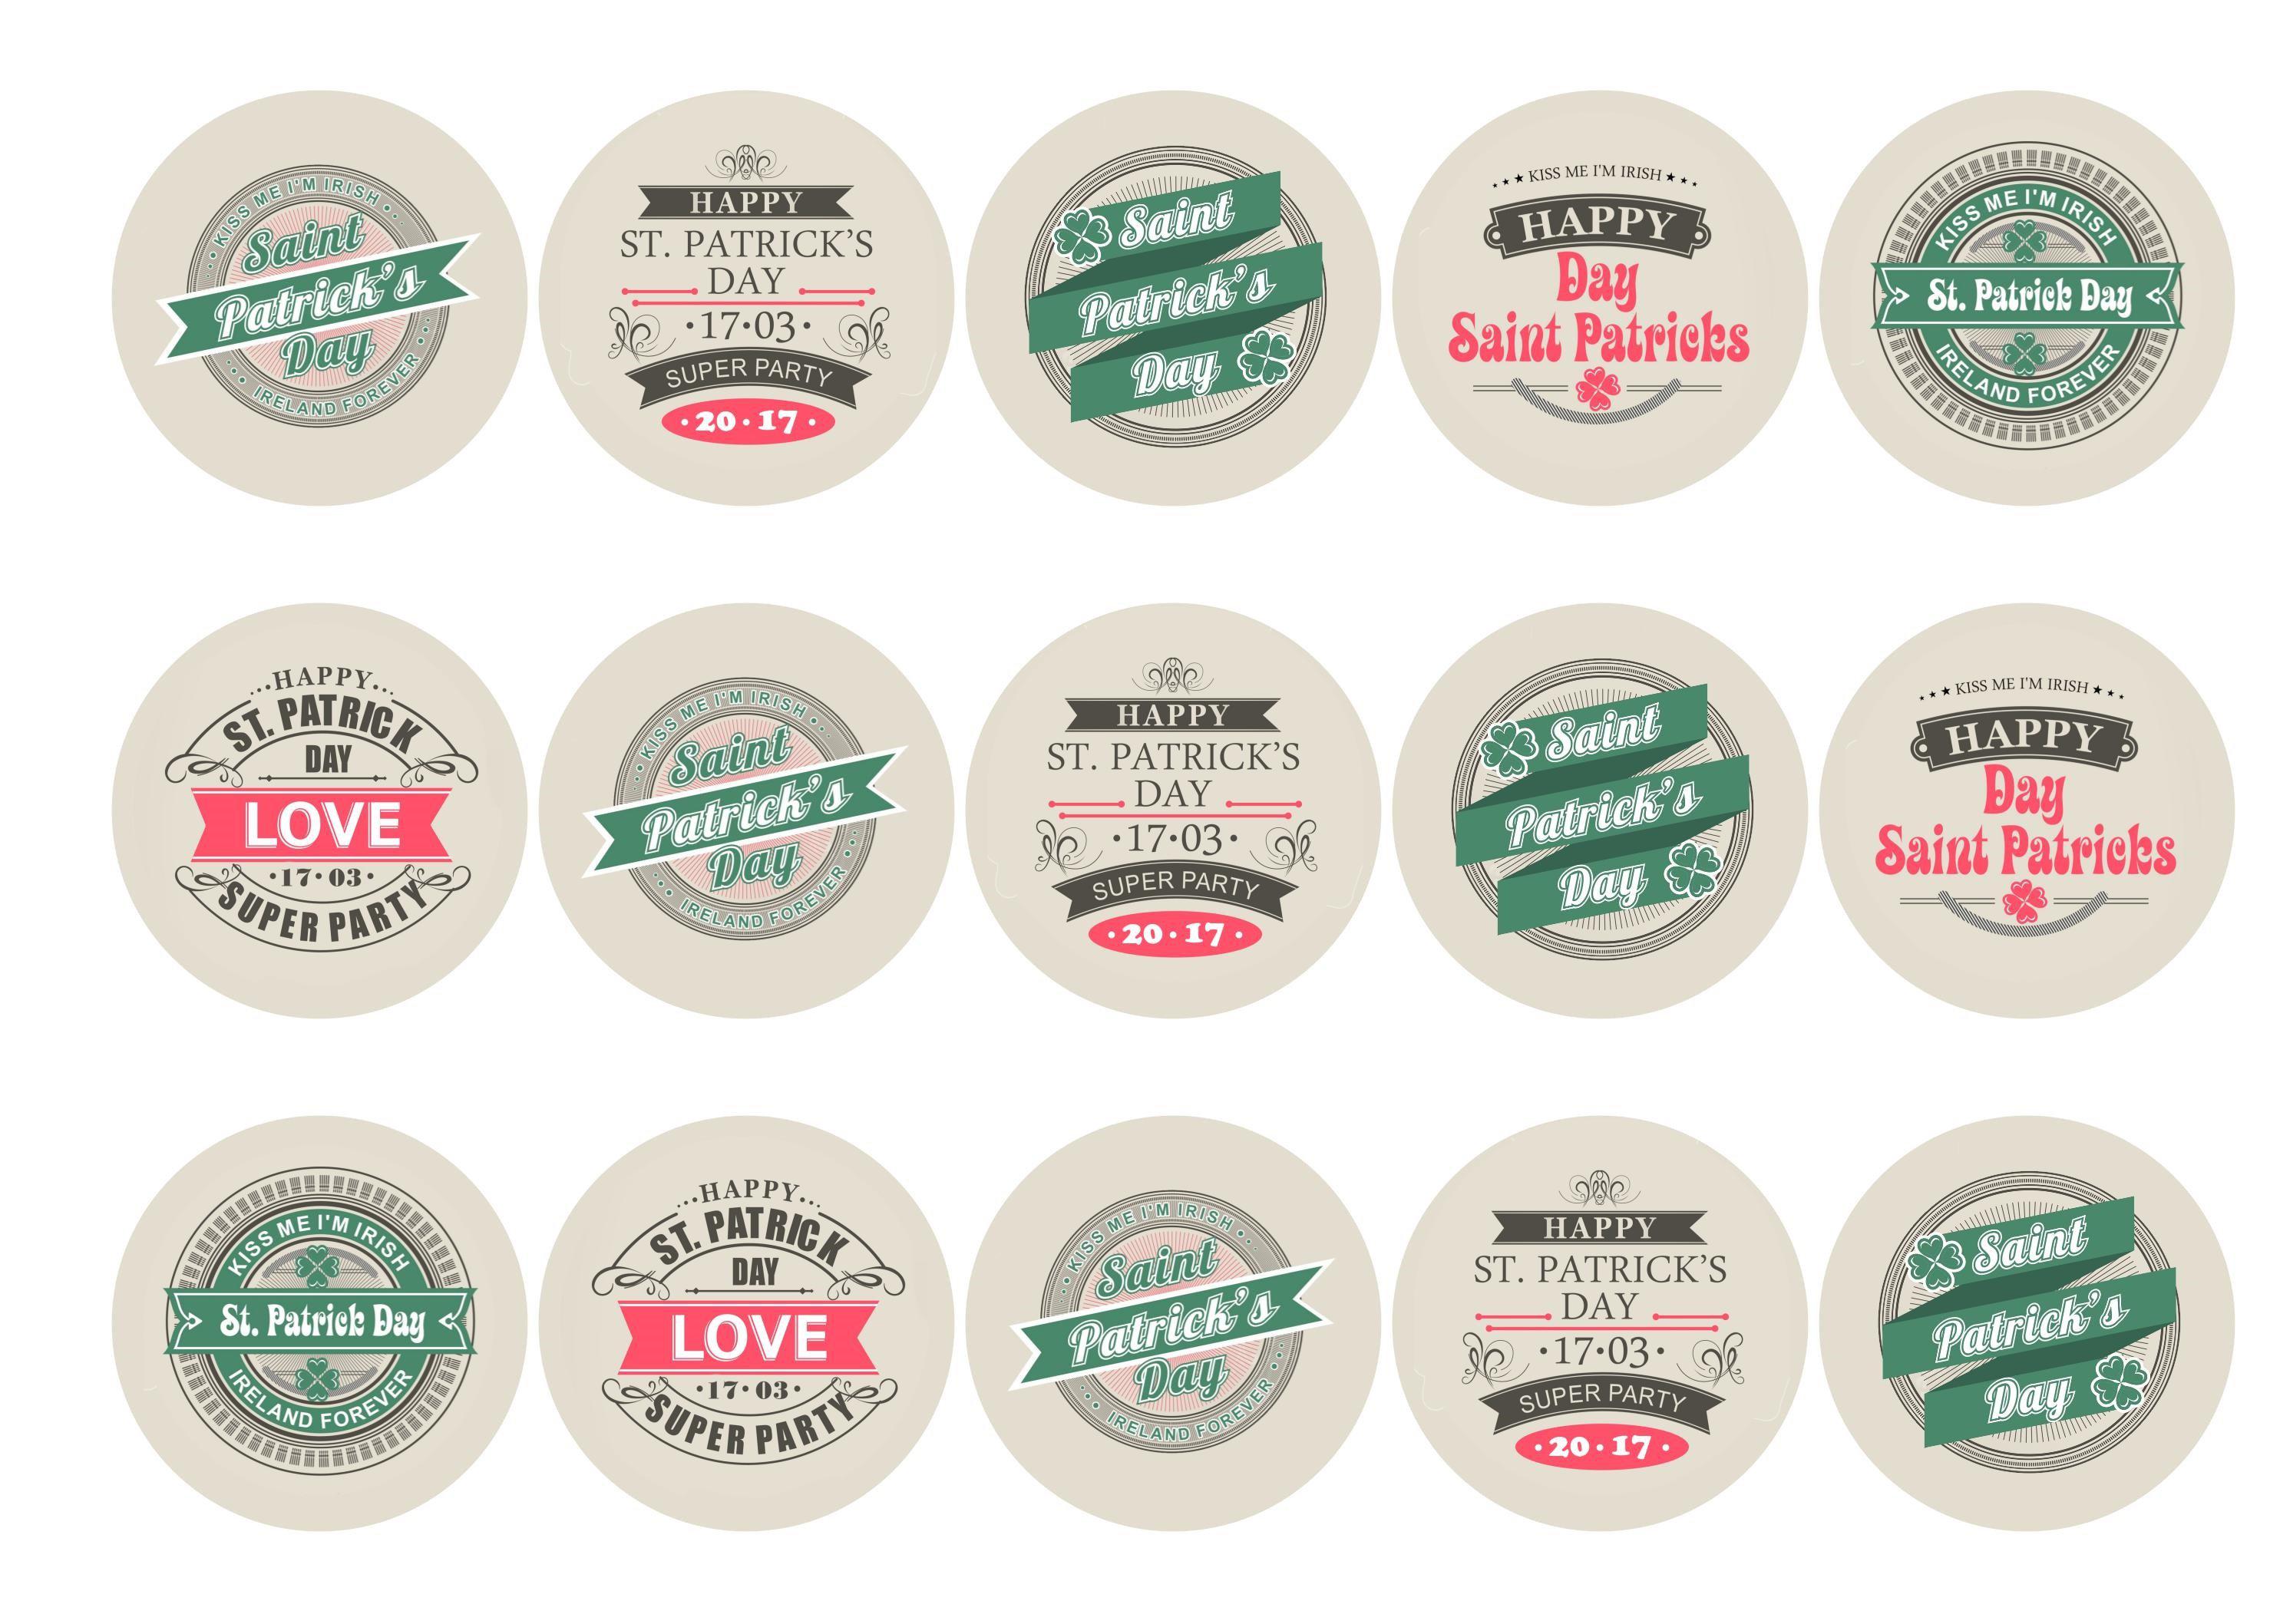 Printed cupcake toppers featuring retro stamp images for St Patricks Day